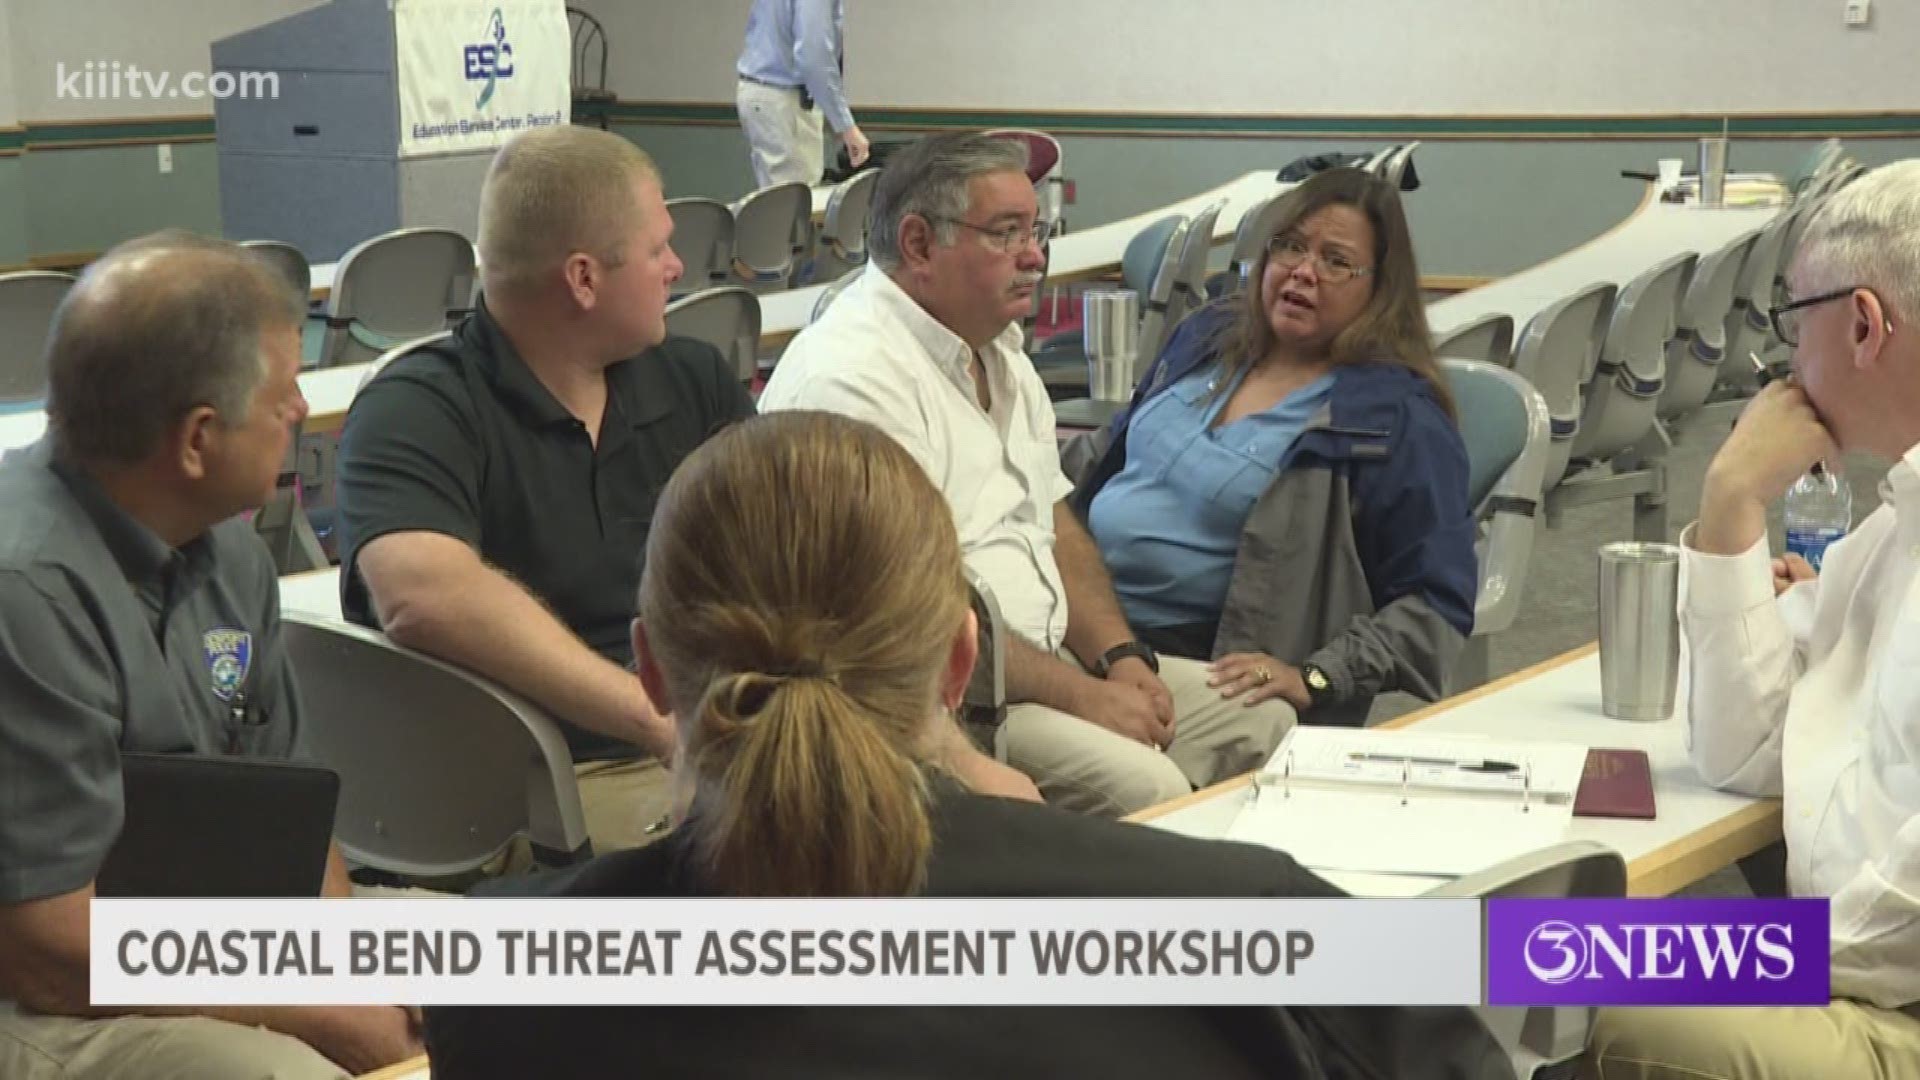 Staff from schools across the Coastal Bend took part in a workshop Tuesday that will help mitigate threats on campus.